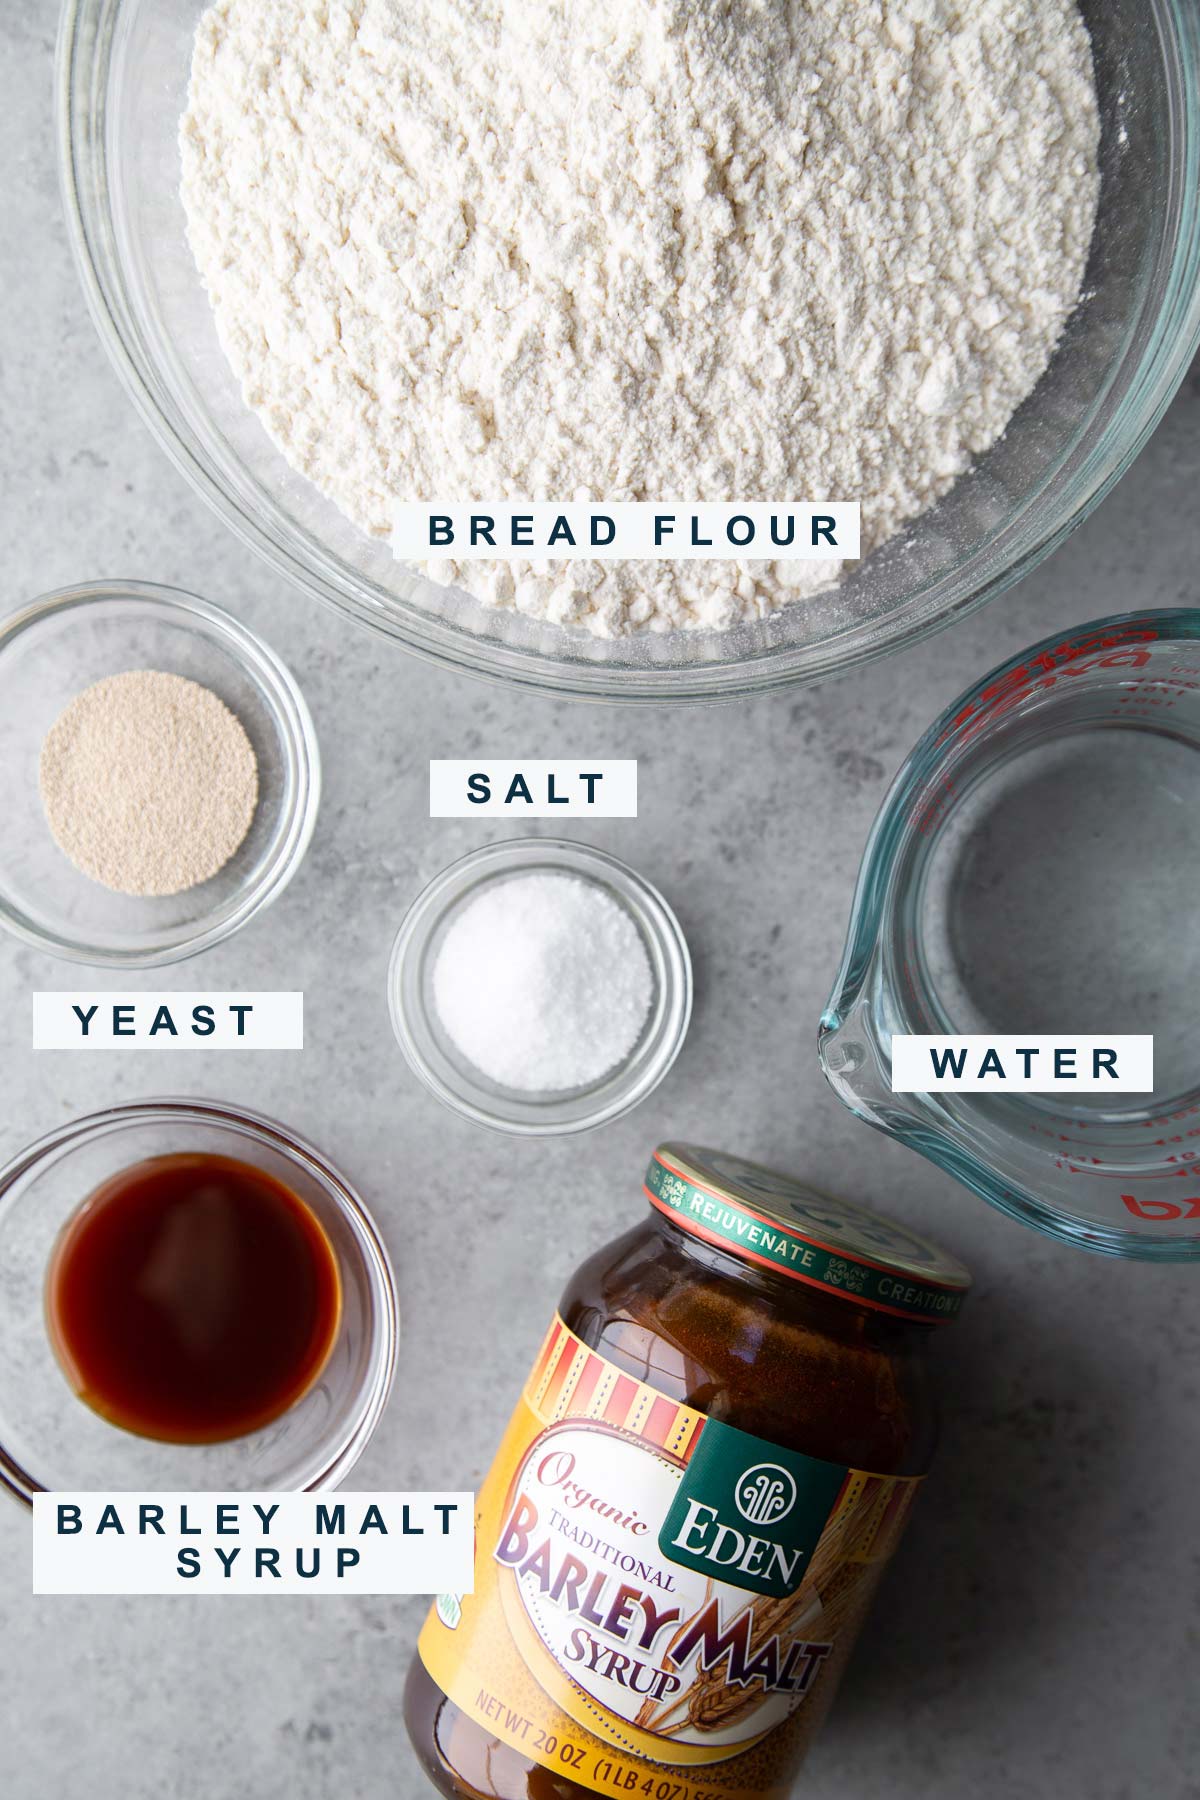 homemade bagel ingredients are bread flour, yeast, salt, water, and barley malt syrup.